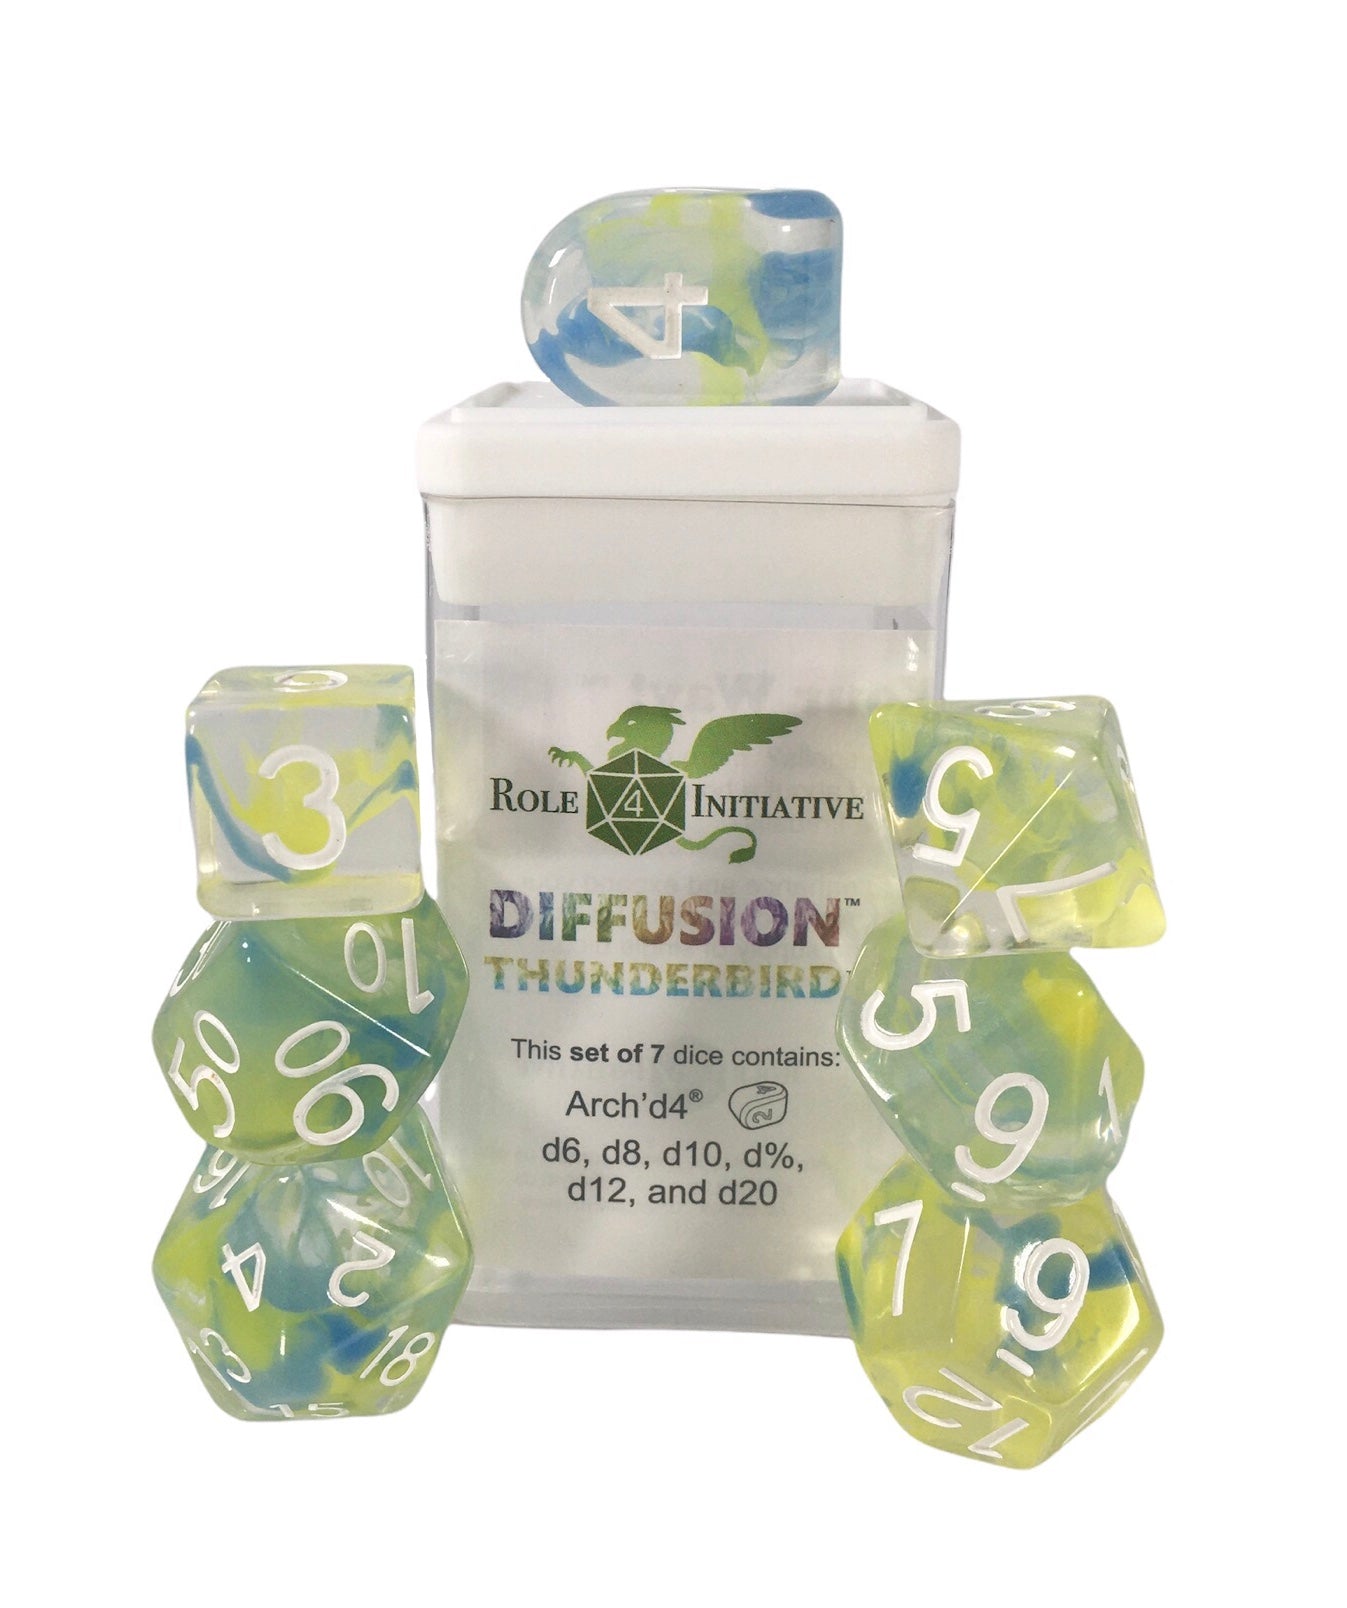 Dice Diffusion Thunderbird - Sets  Singles Set of 7 w/ Arch'd4 in box